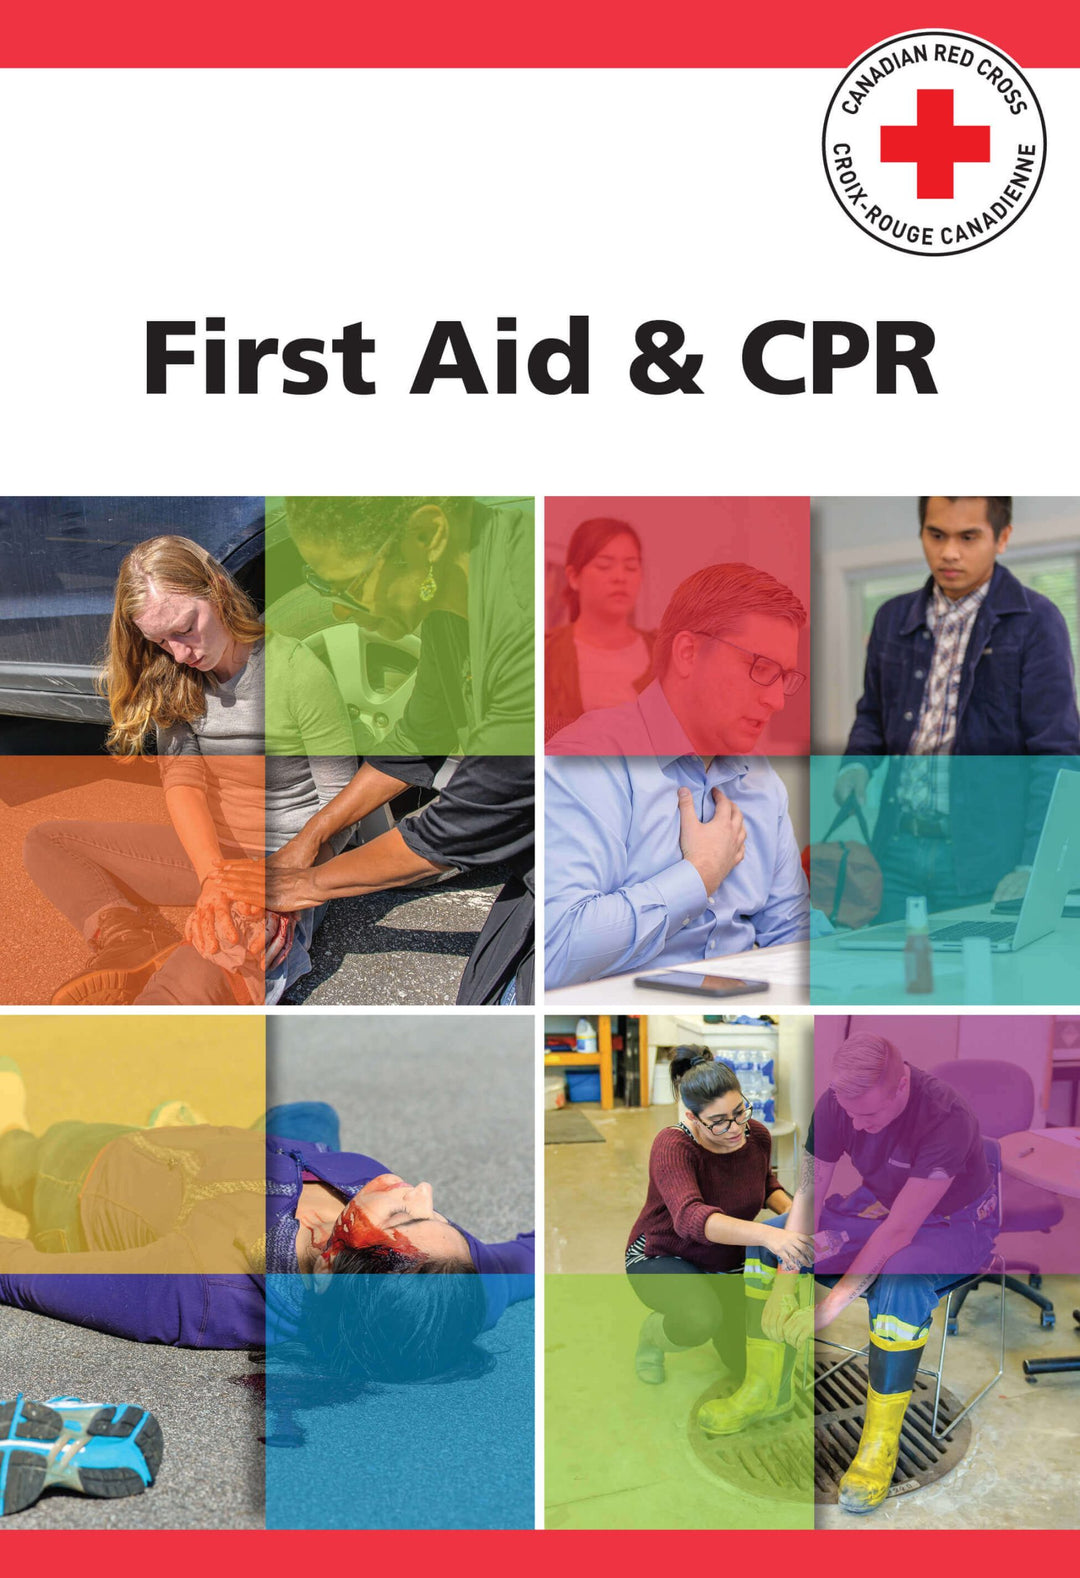 Canadian Red Cross First Aid Training Manuals